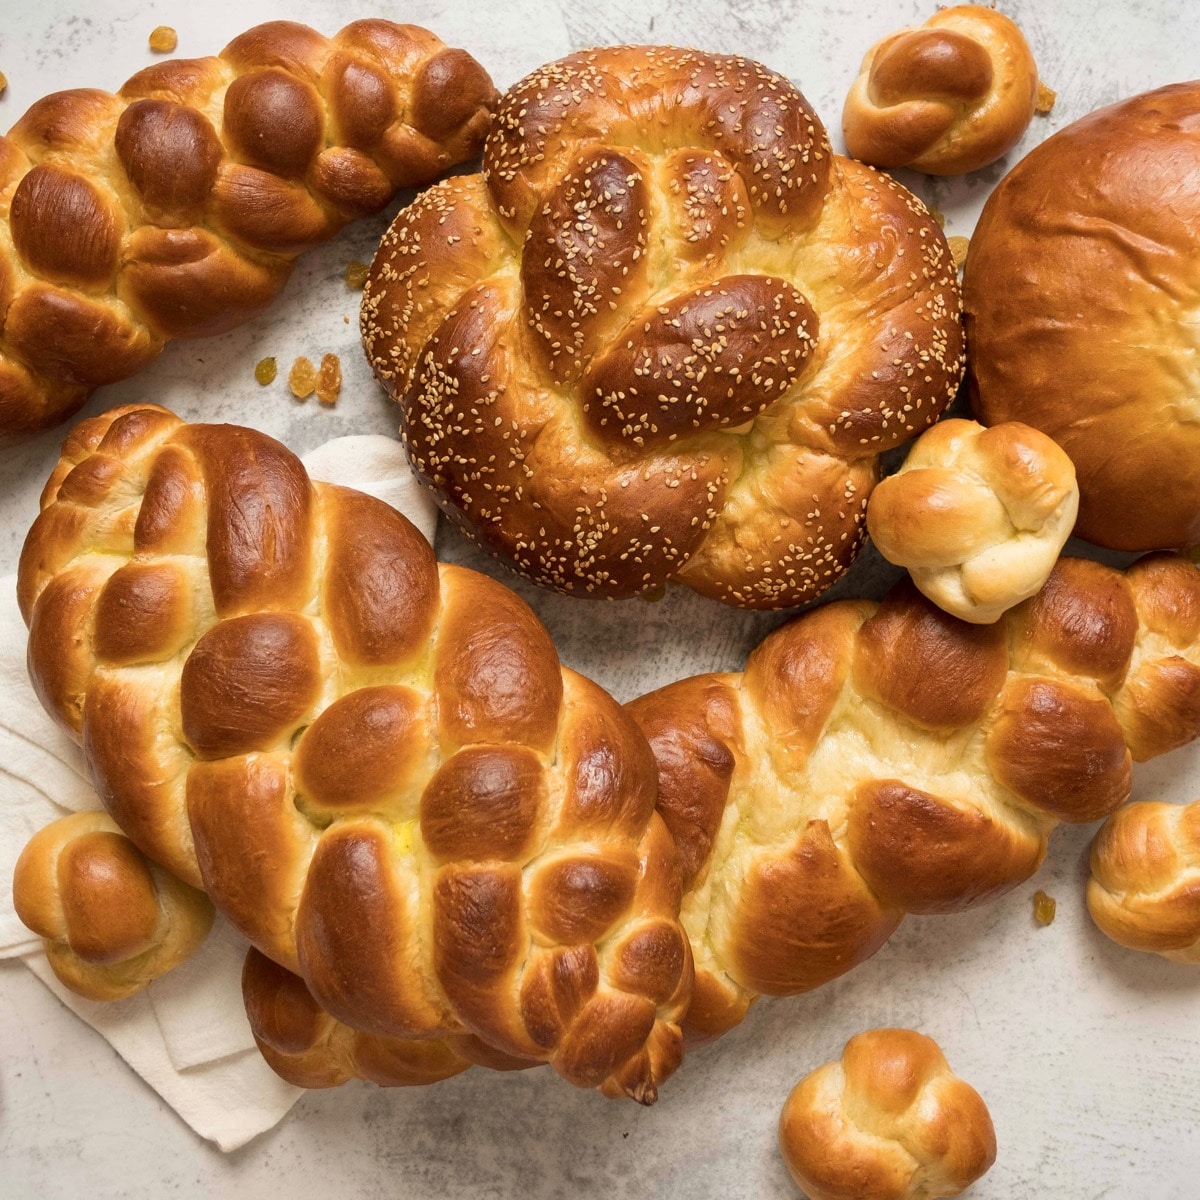 Square Crop - Overhead shot - multiple challah braids - three strand, four strand, round braid, turban challah, and challah rolls, on marble countertop with cloth napkin beneath.